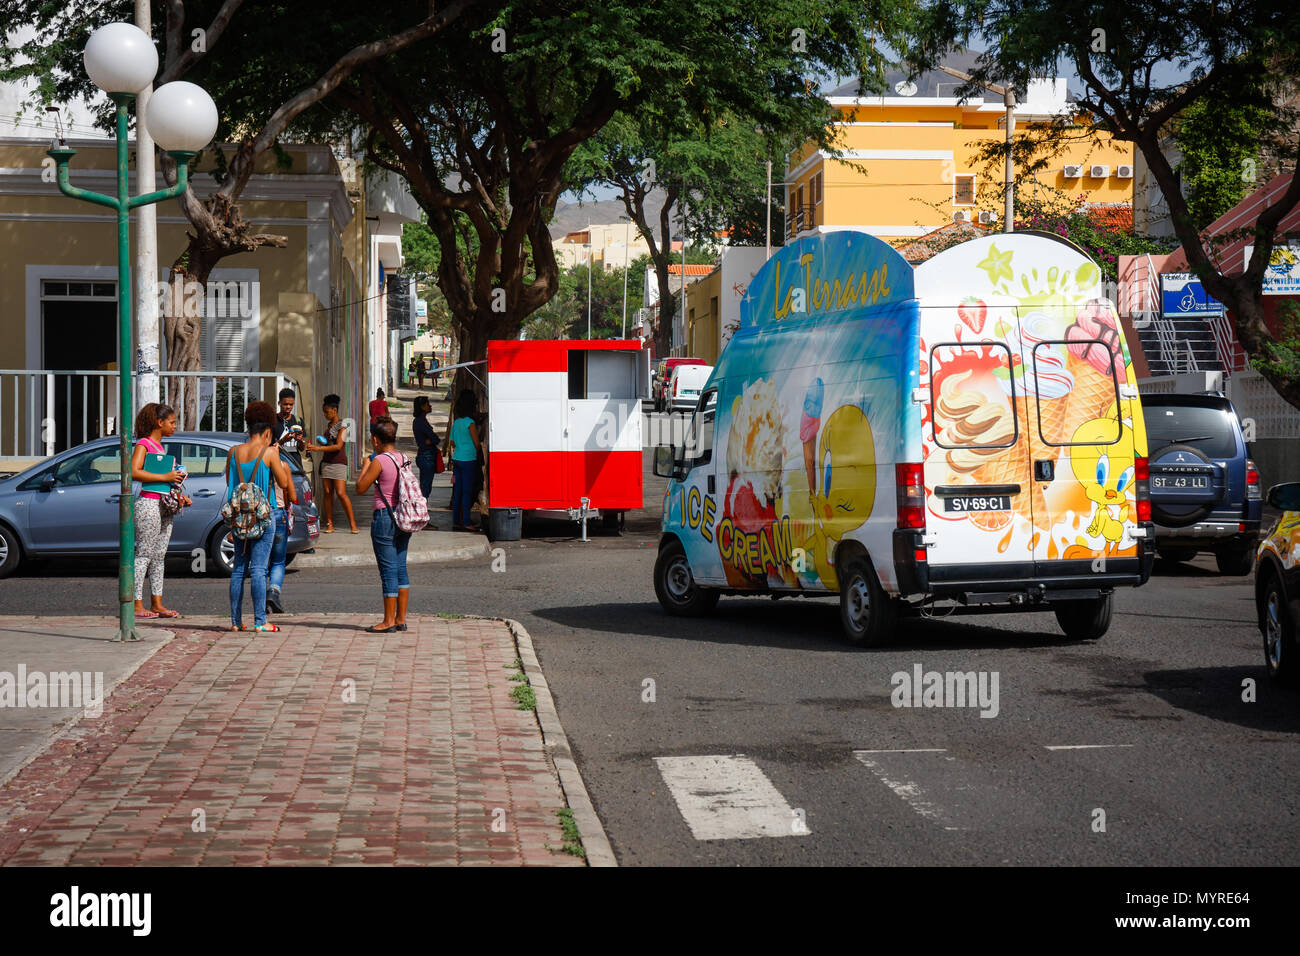 Ice Cream truck and people in the streets. Life in MINDELO, CAPE VERDE - DECEMBER 07, 2015 Stock Photo